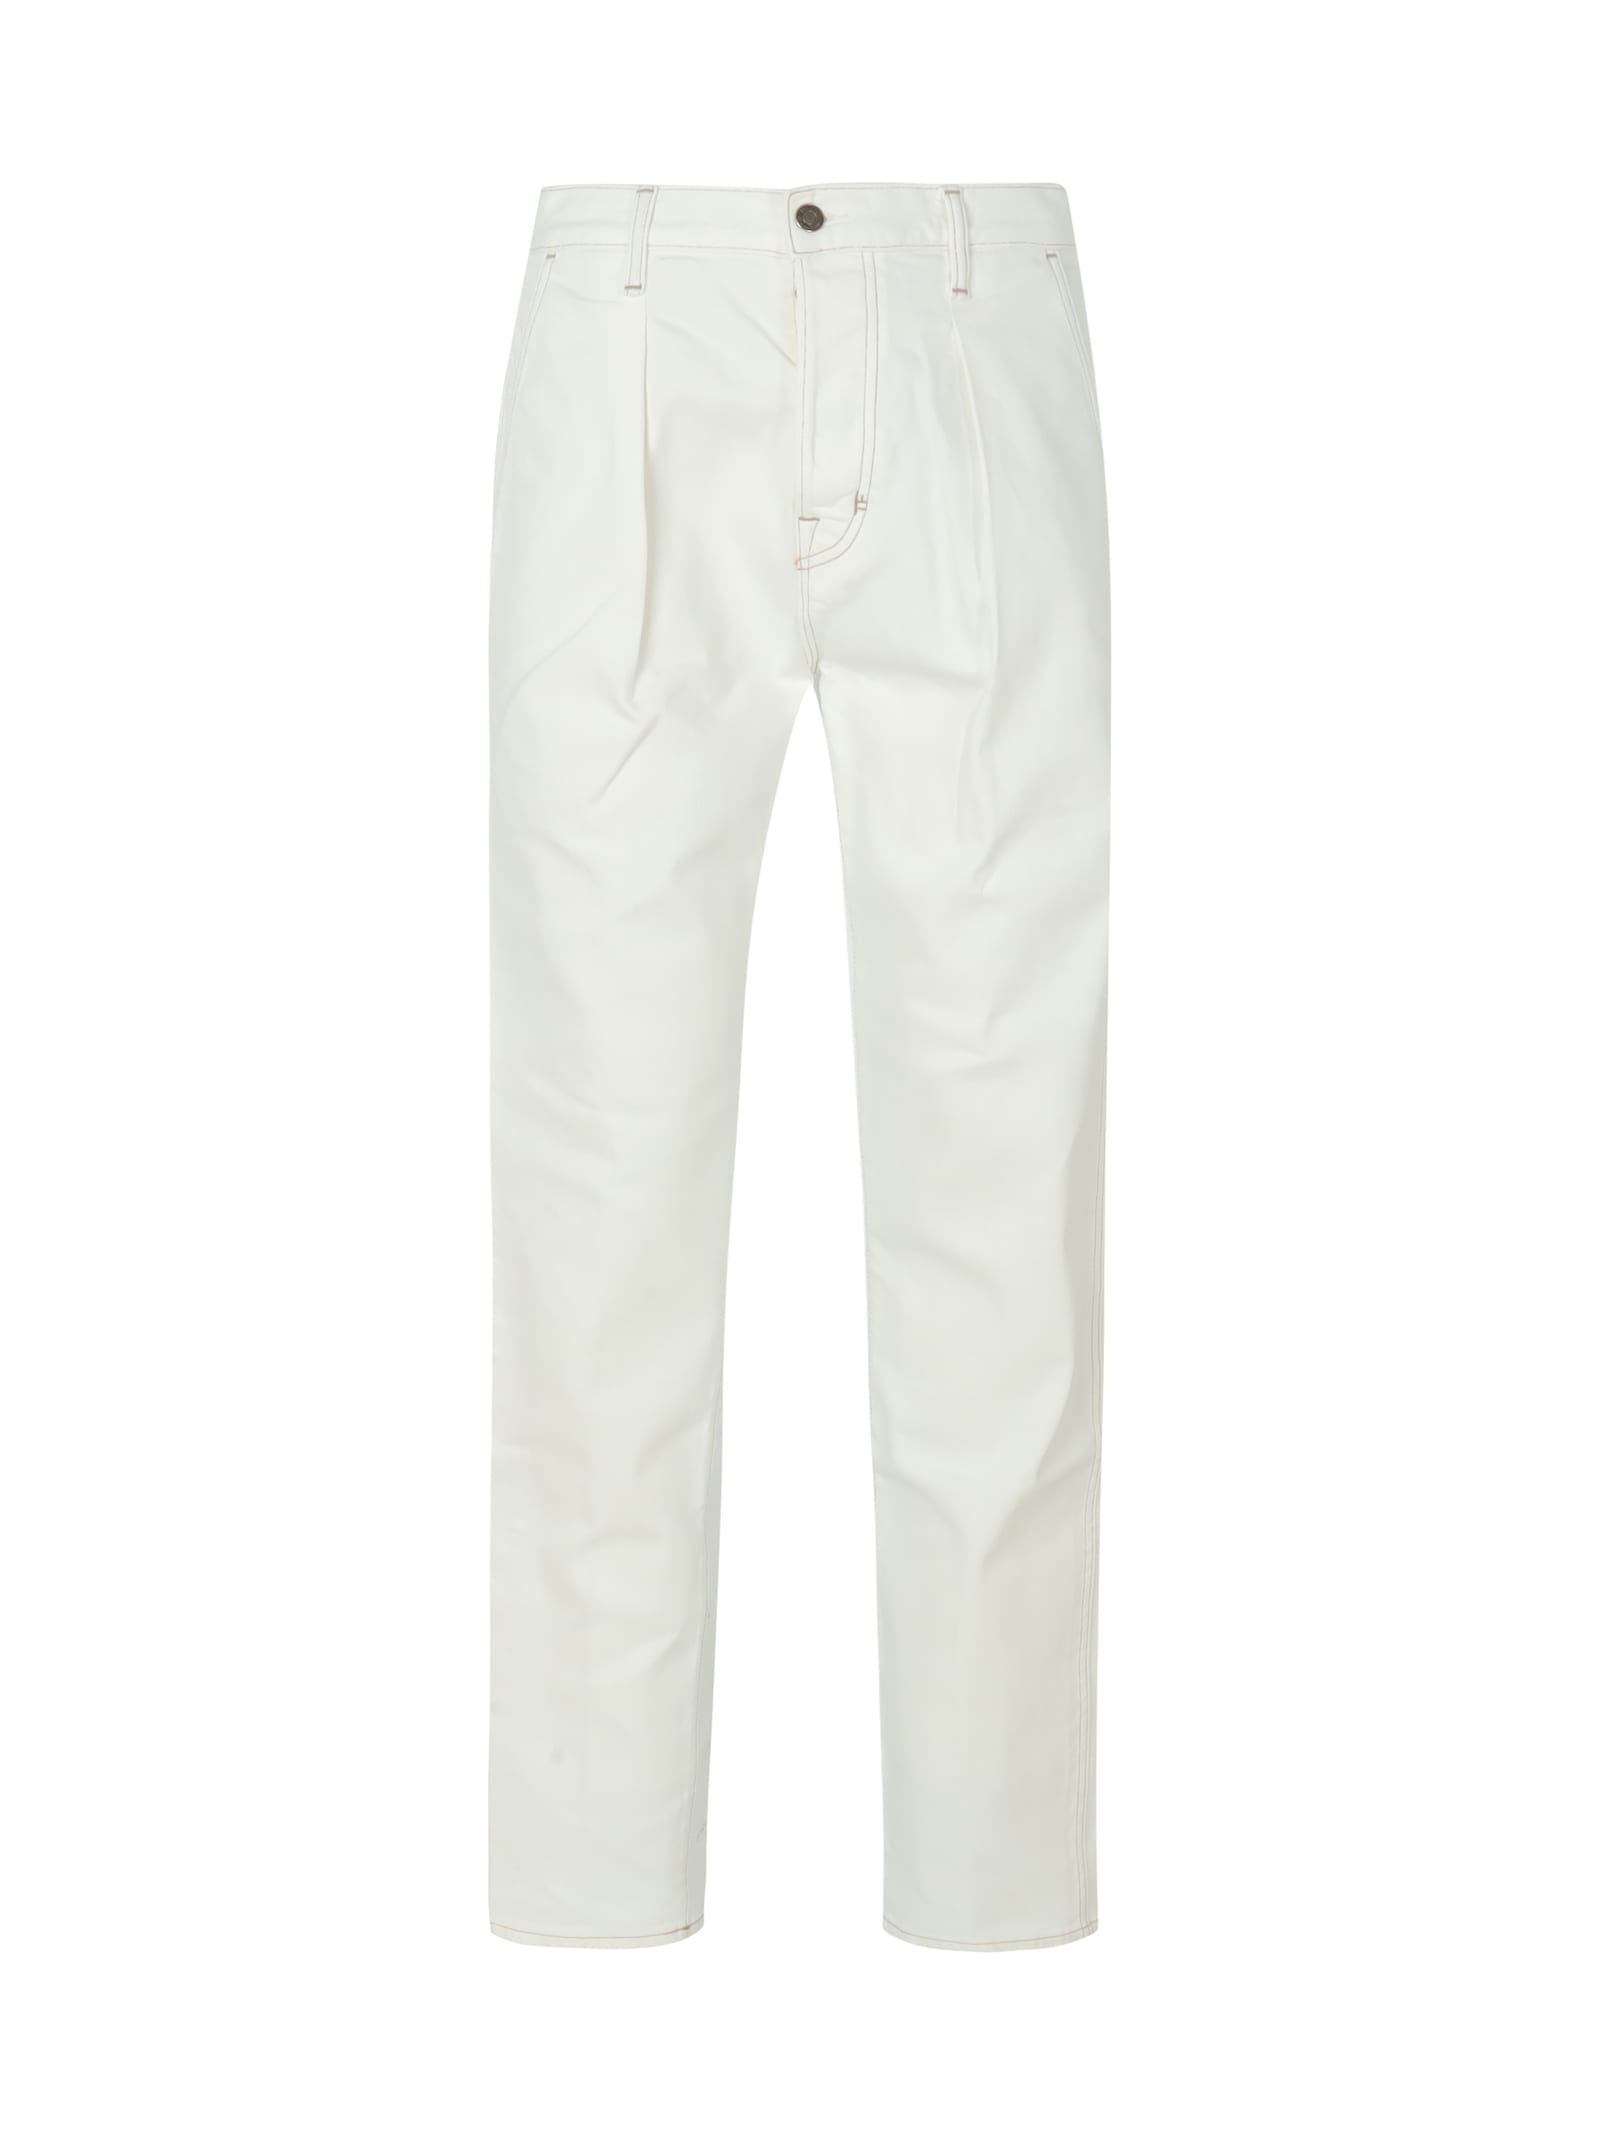 Tom Ford Confort White Pleated Chino